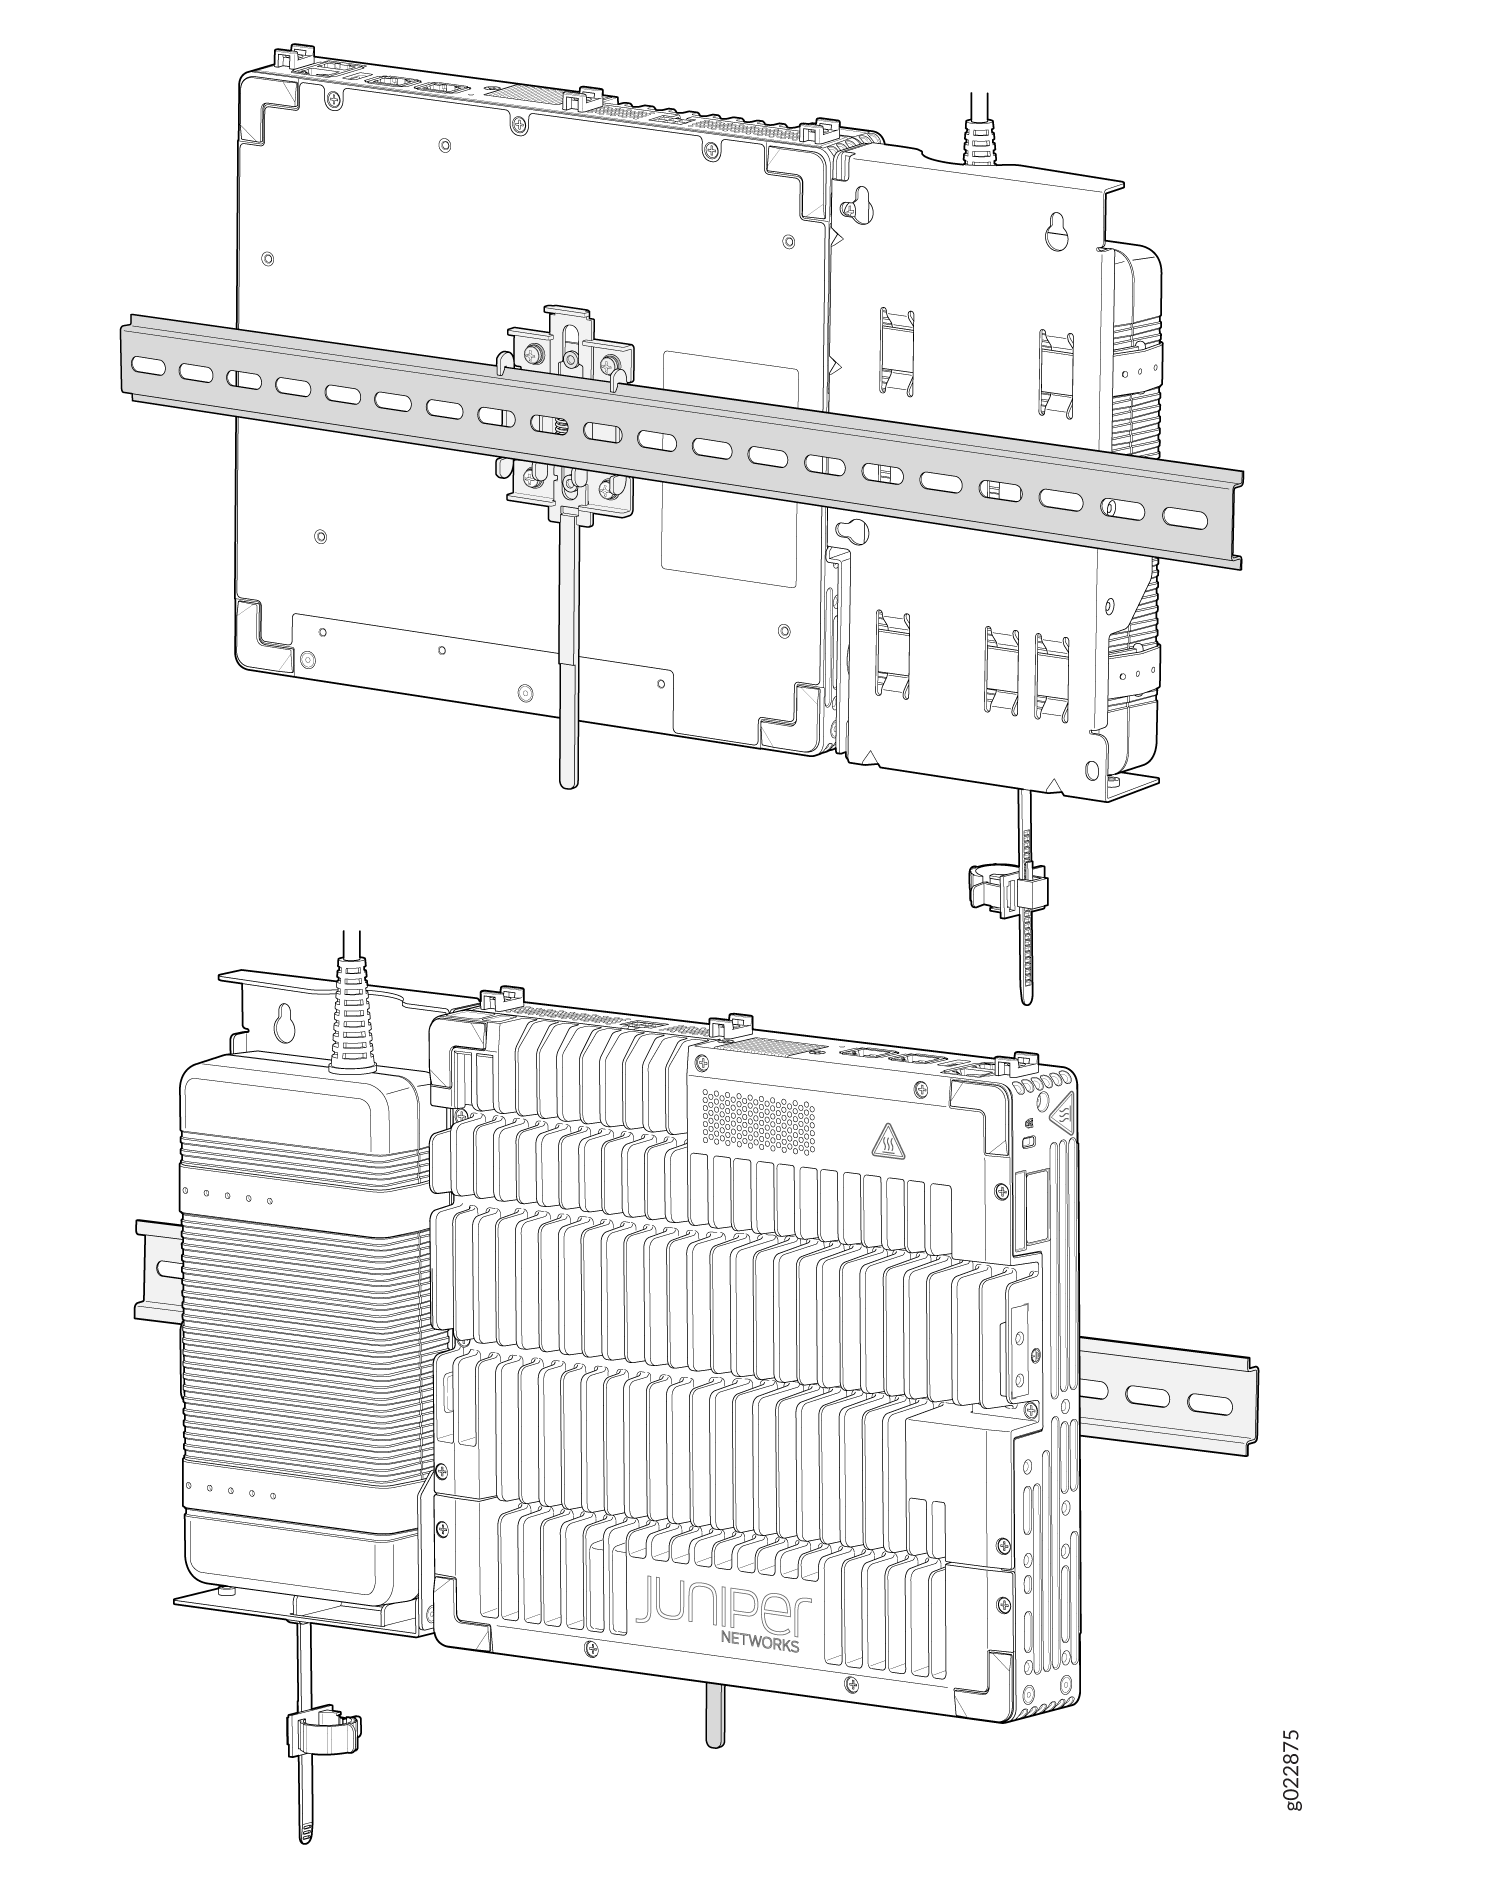 Rear View and Front View of the Switch and Power Supply Adaptor Mounted on the DIN Rail